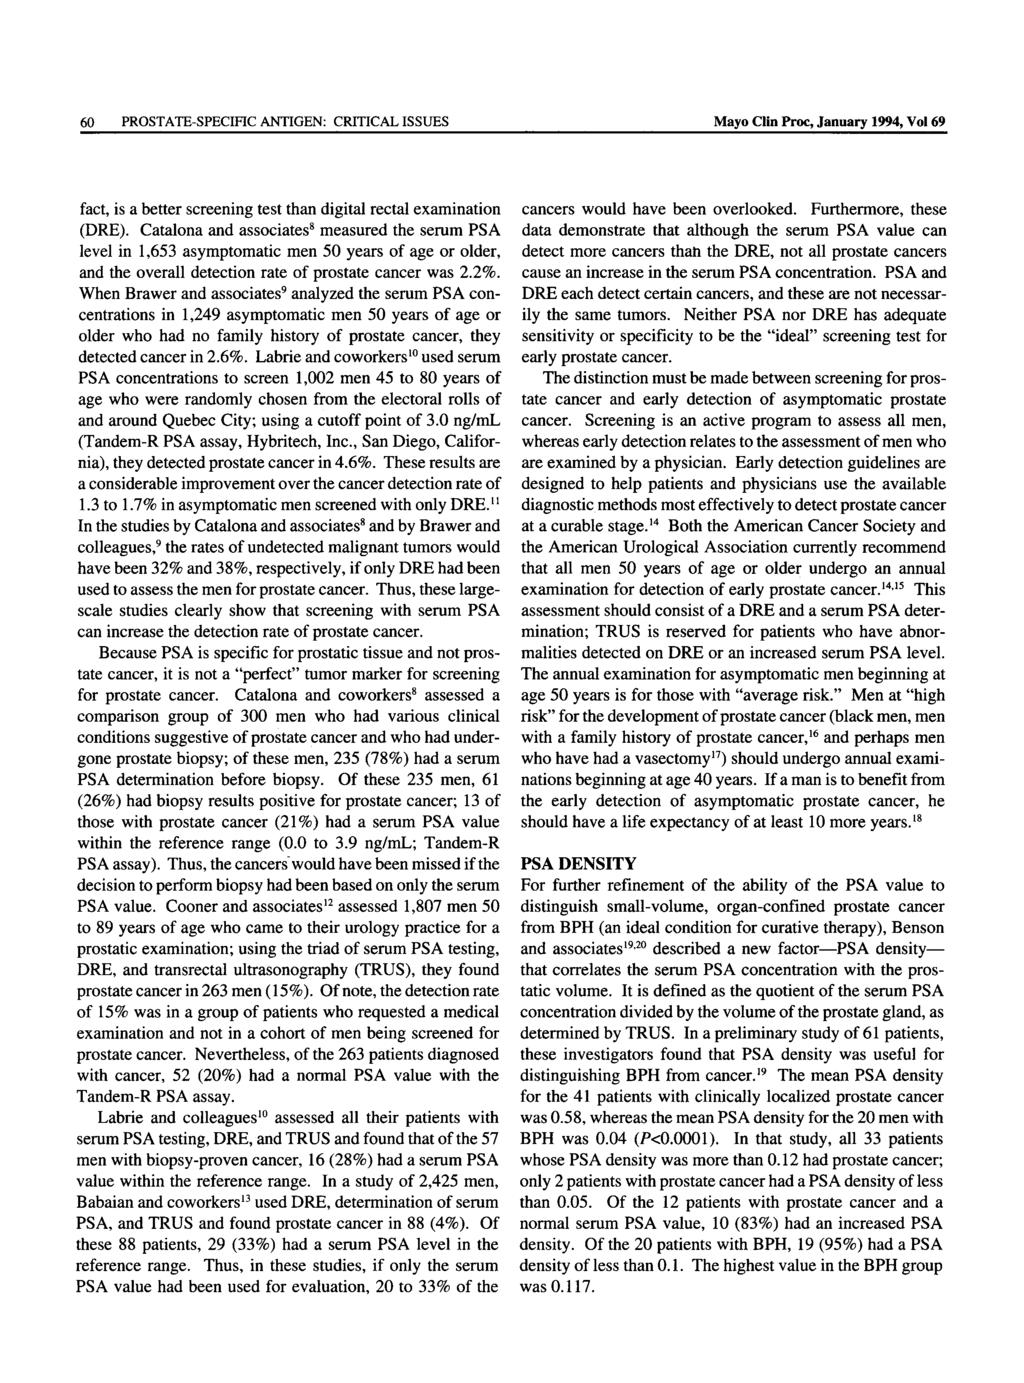 60 PROSTATE-SPECIFIC ANTIGEN: CRITICAL ISSUES Mayo Clin Proc, January 1994, Vol 69 fact, is a better screening test than digital rectal examination (DRE).